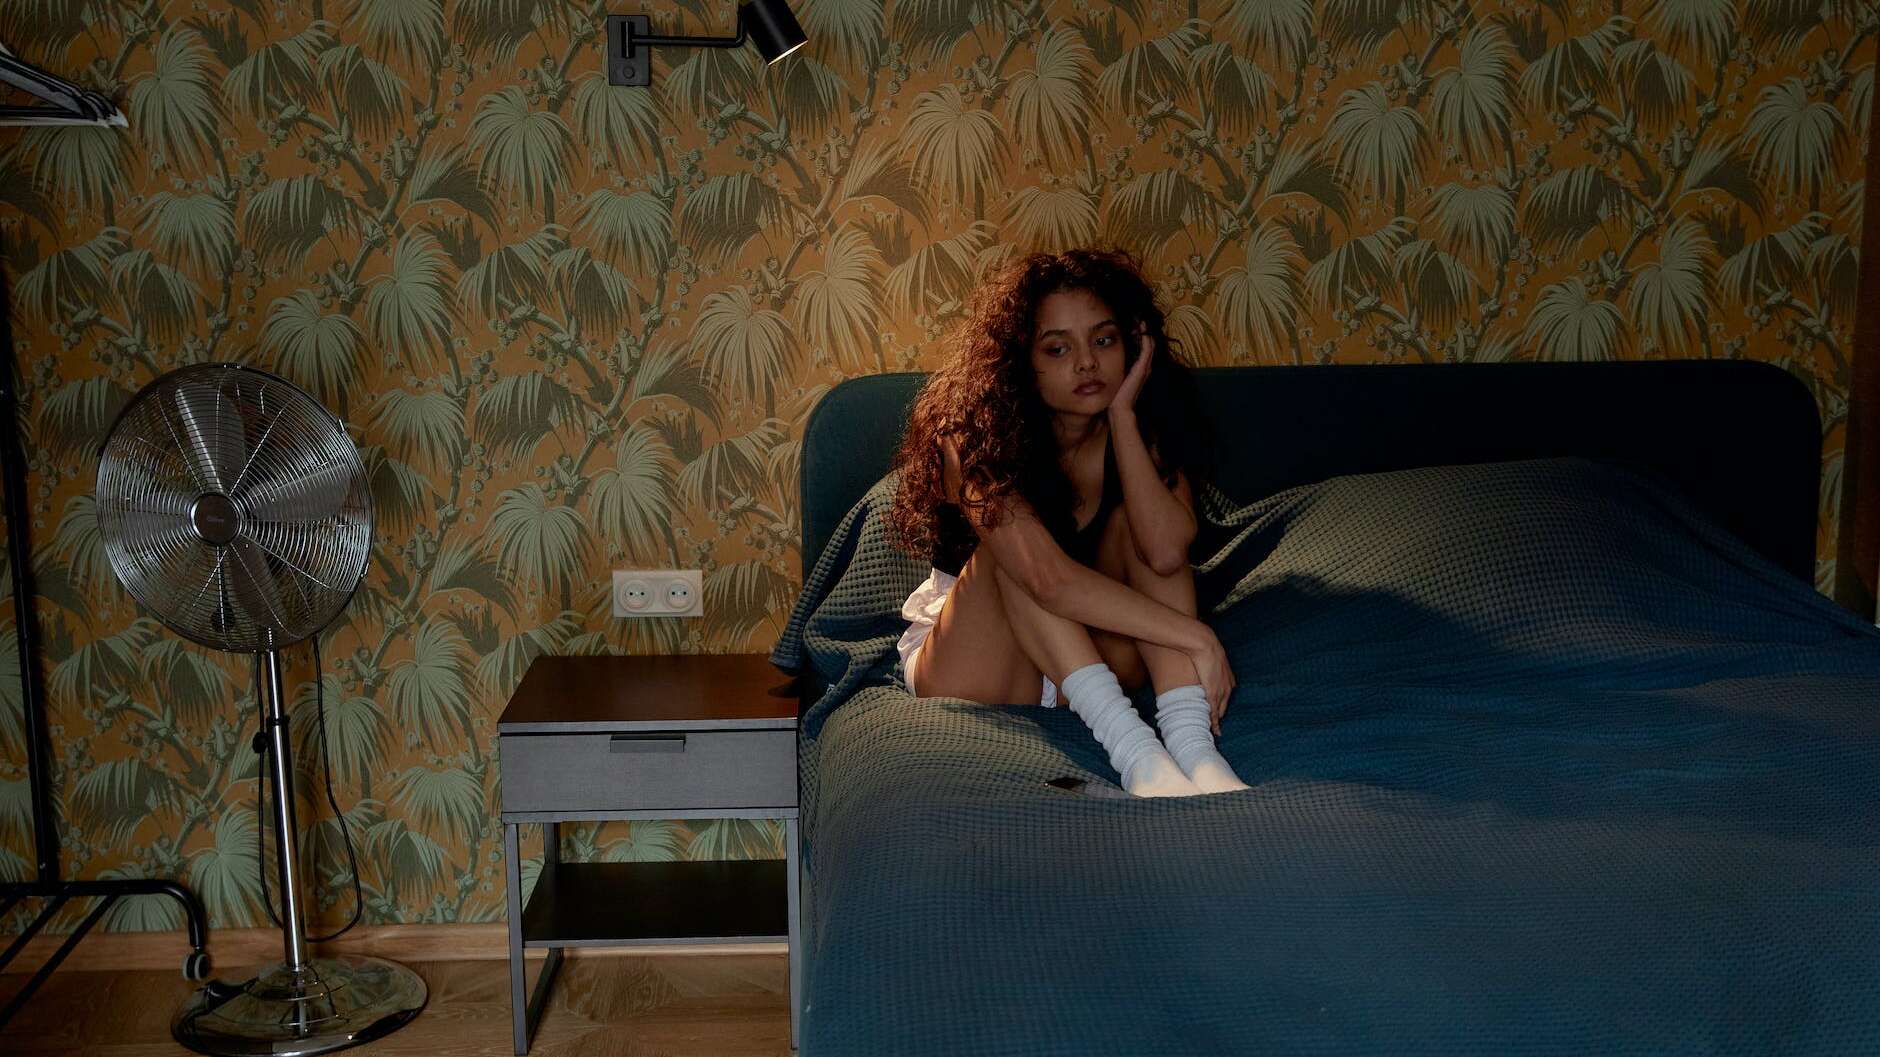 photo of a woman with curly hair sitting on the bed